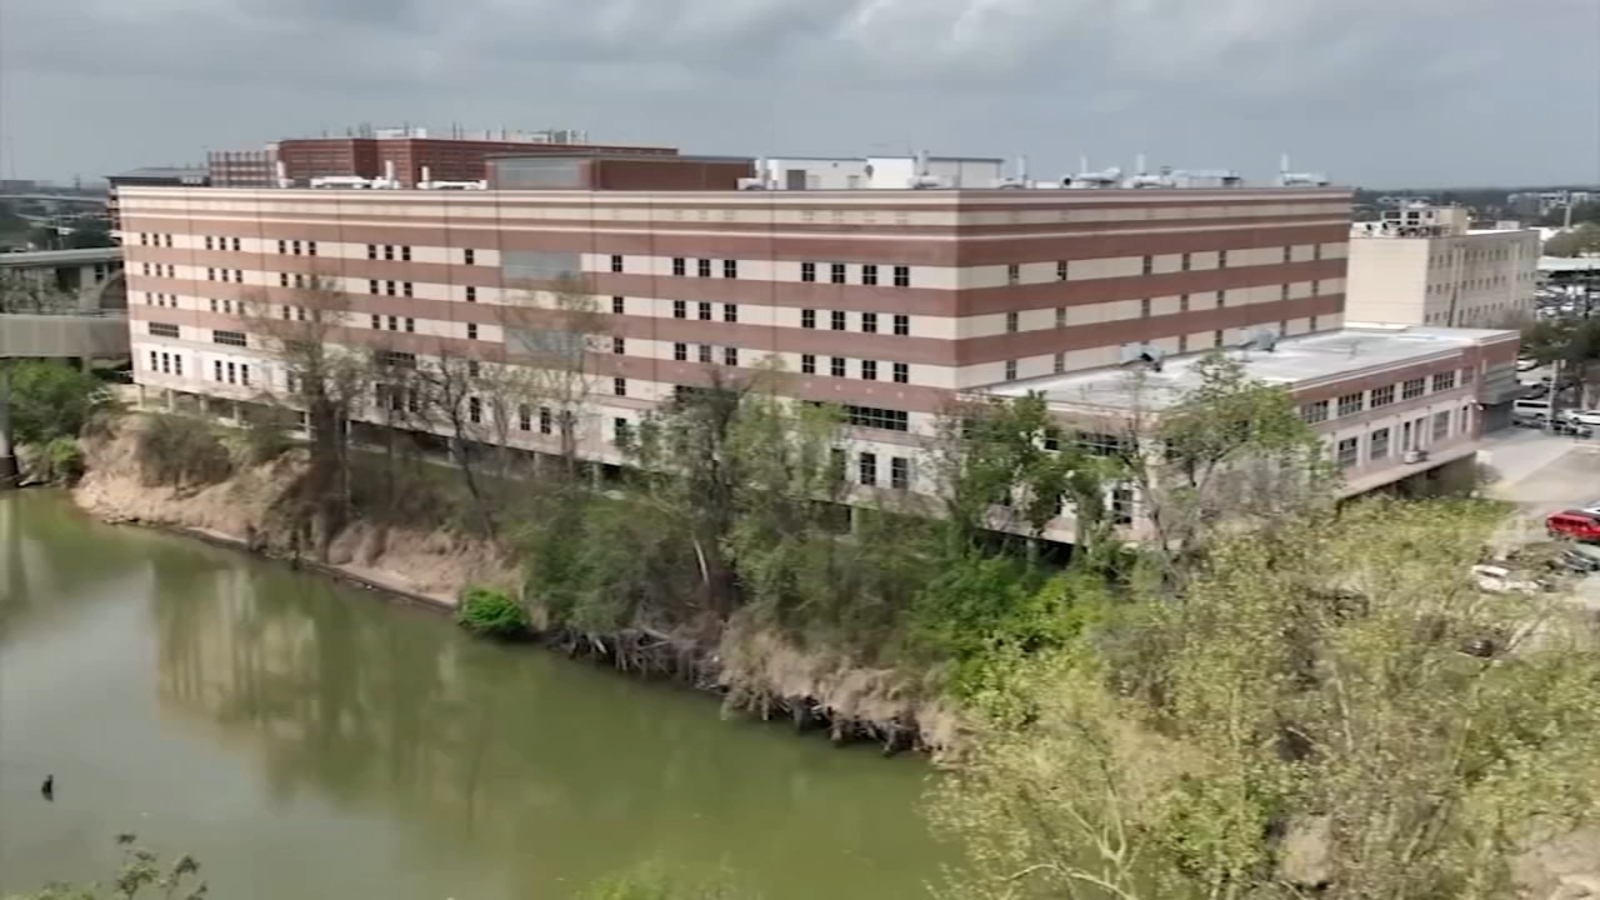 Harris County approves millions to improve safety at the jail, while considering building a new facility [Video]